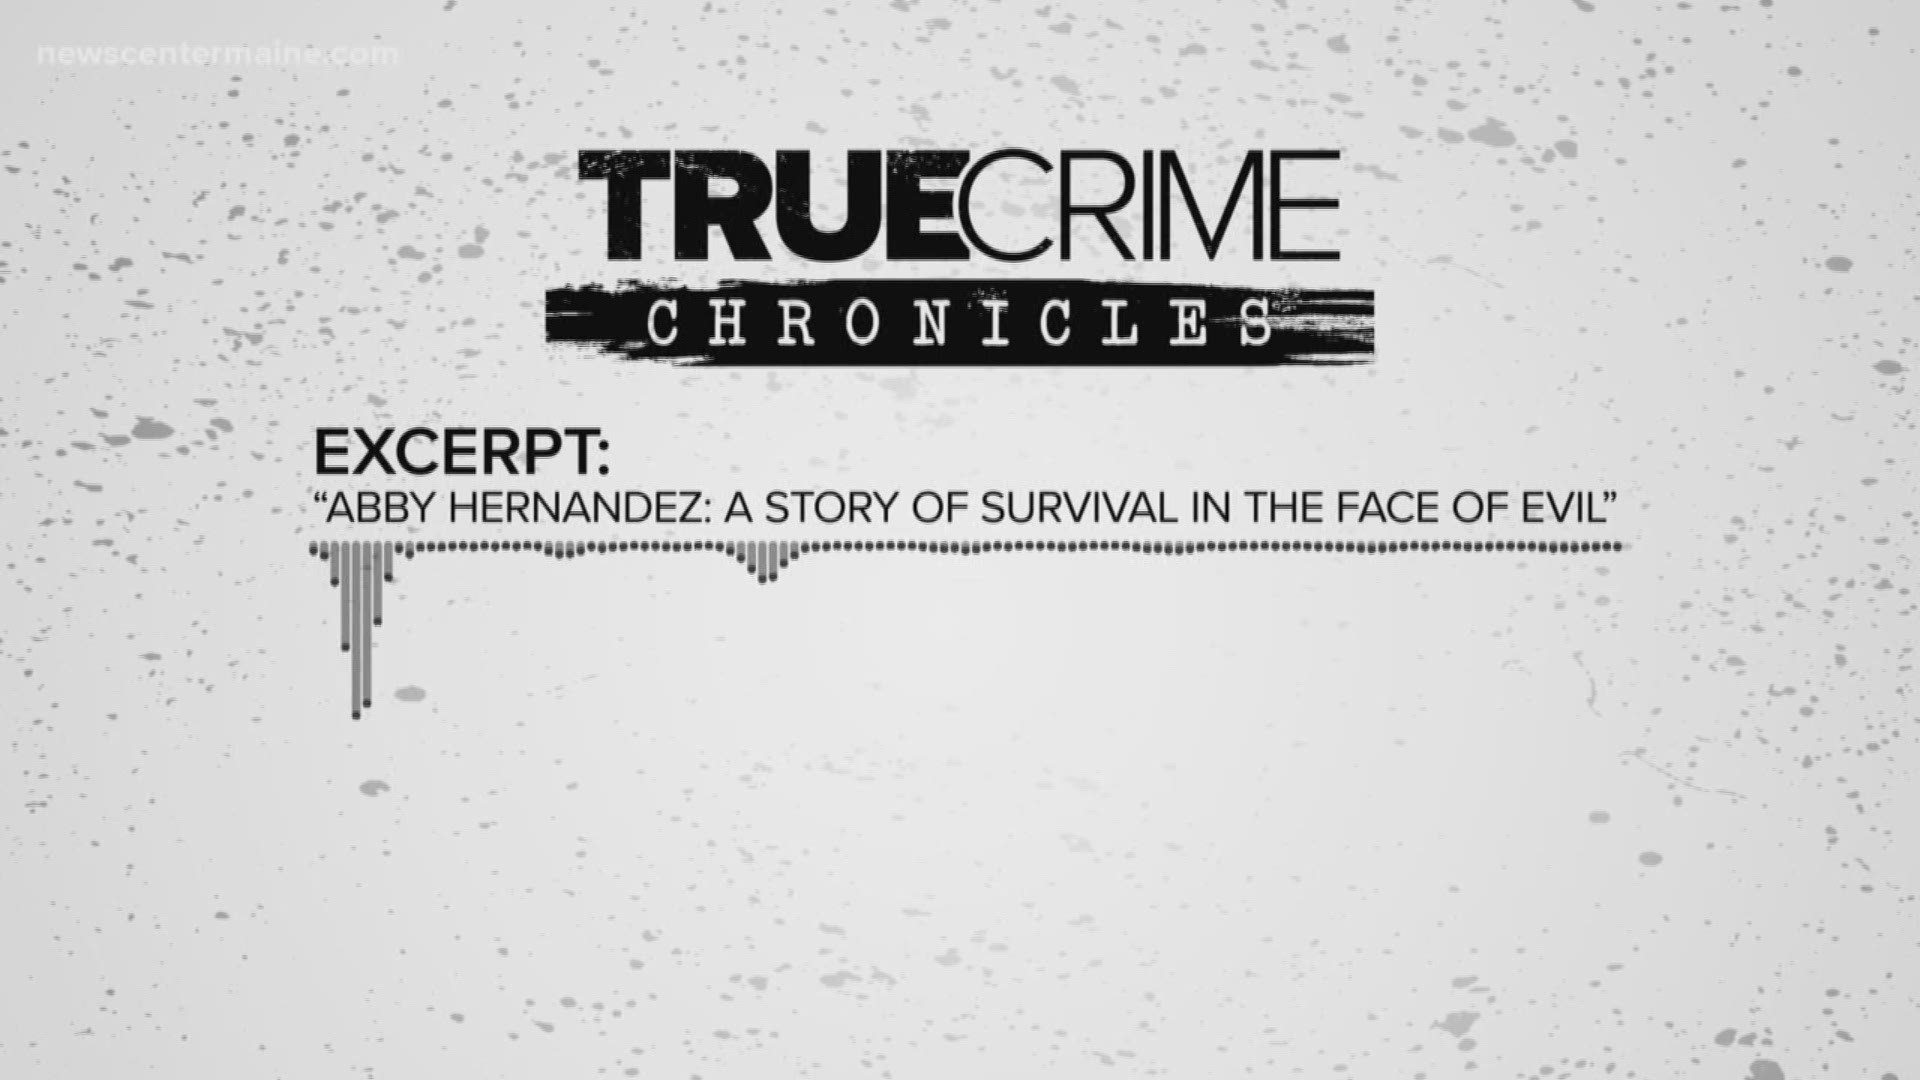 'True Crime Chronicles', a new podcast from Tegna, revisits the 2013 Abby Hernandez case in Conway, New Hampshire.